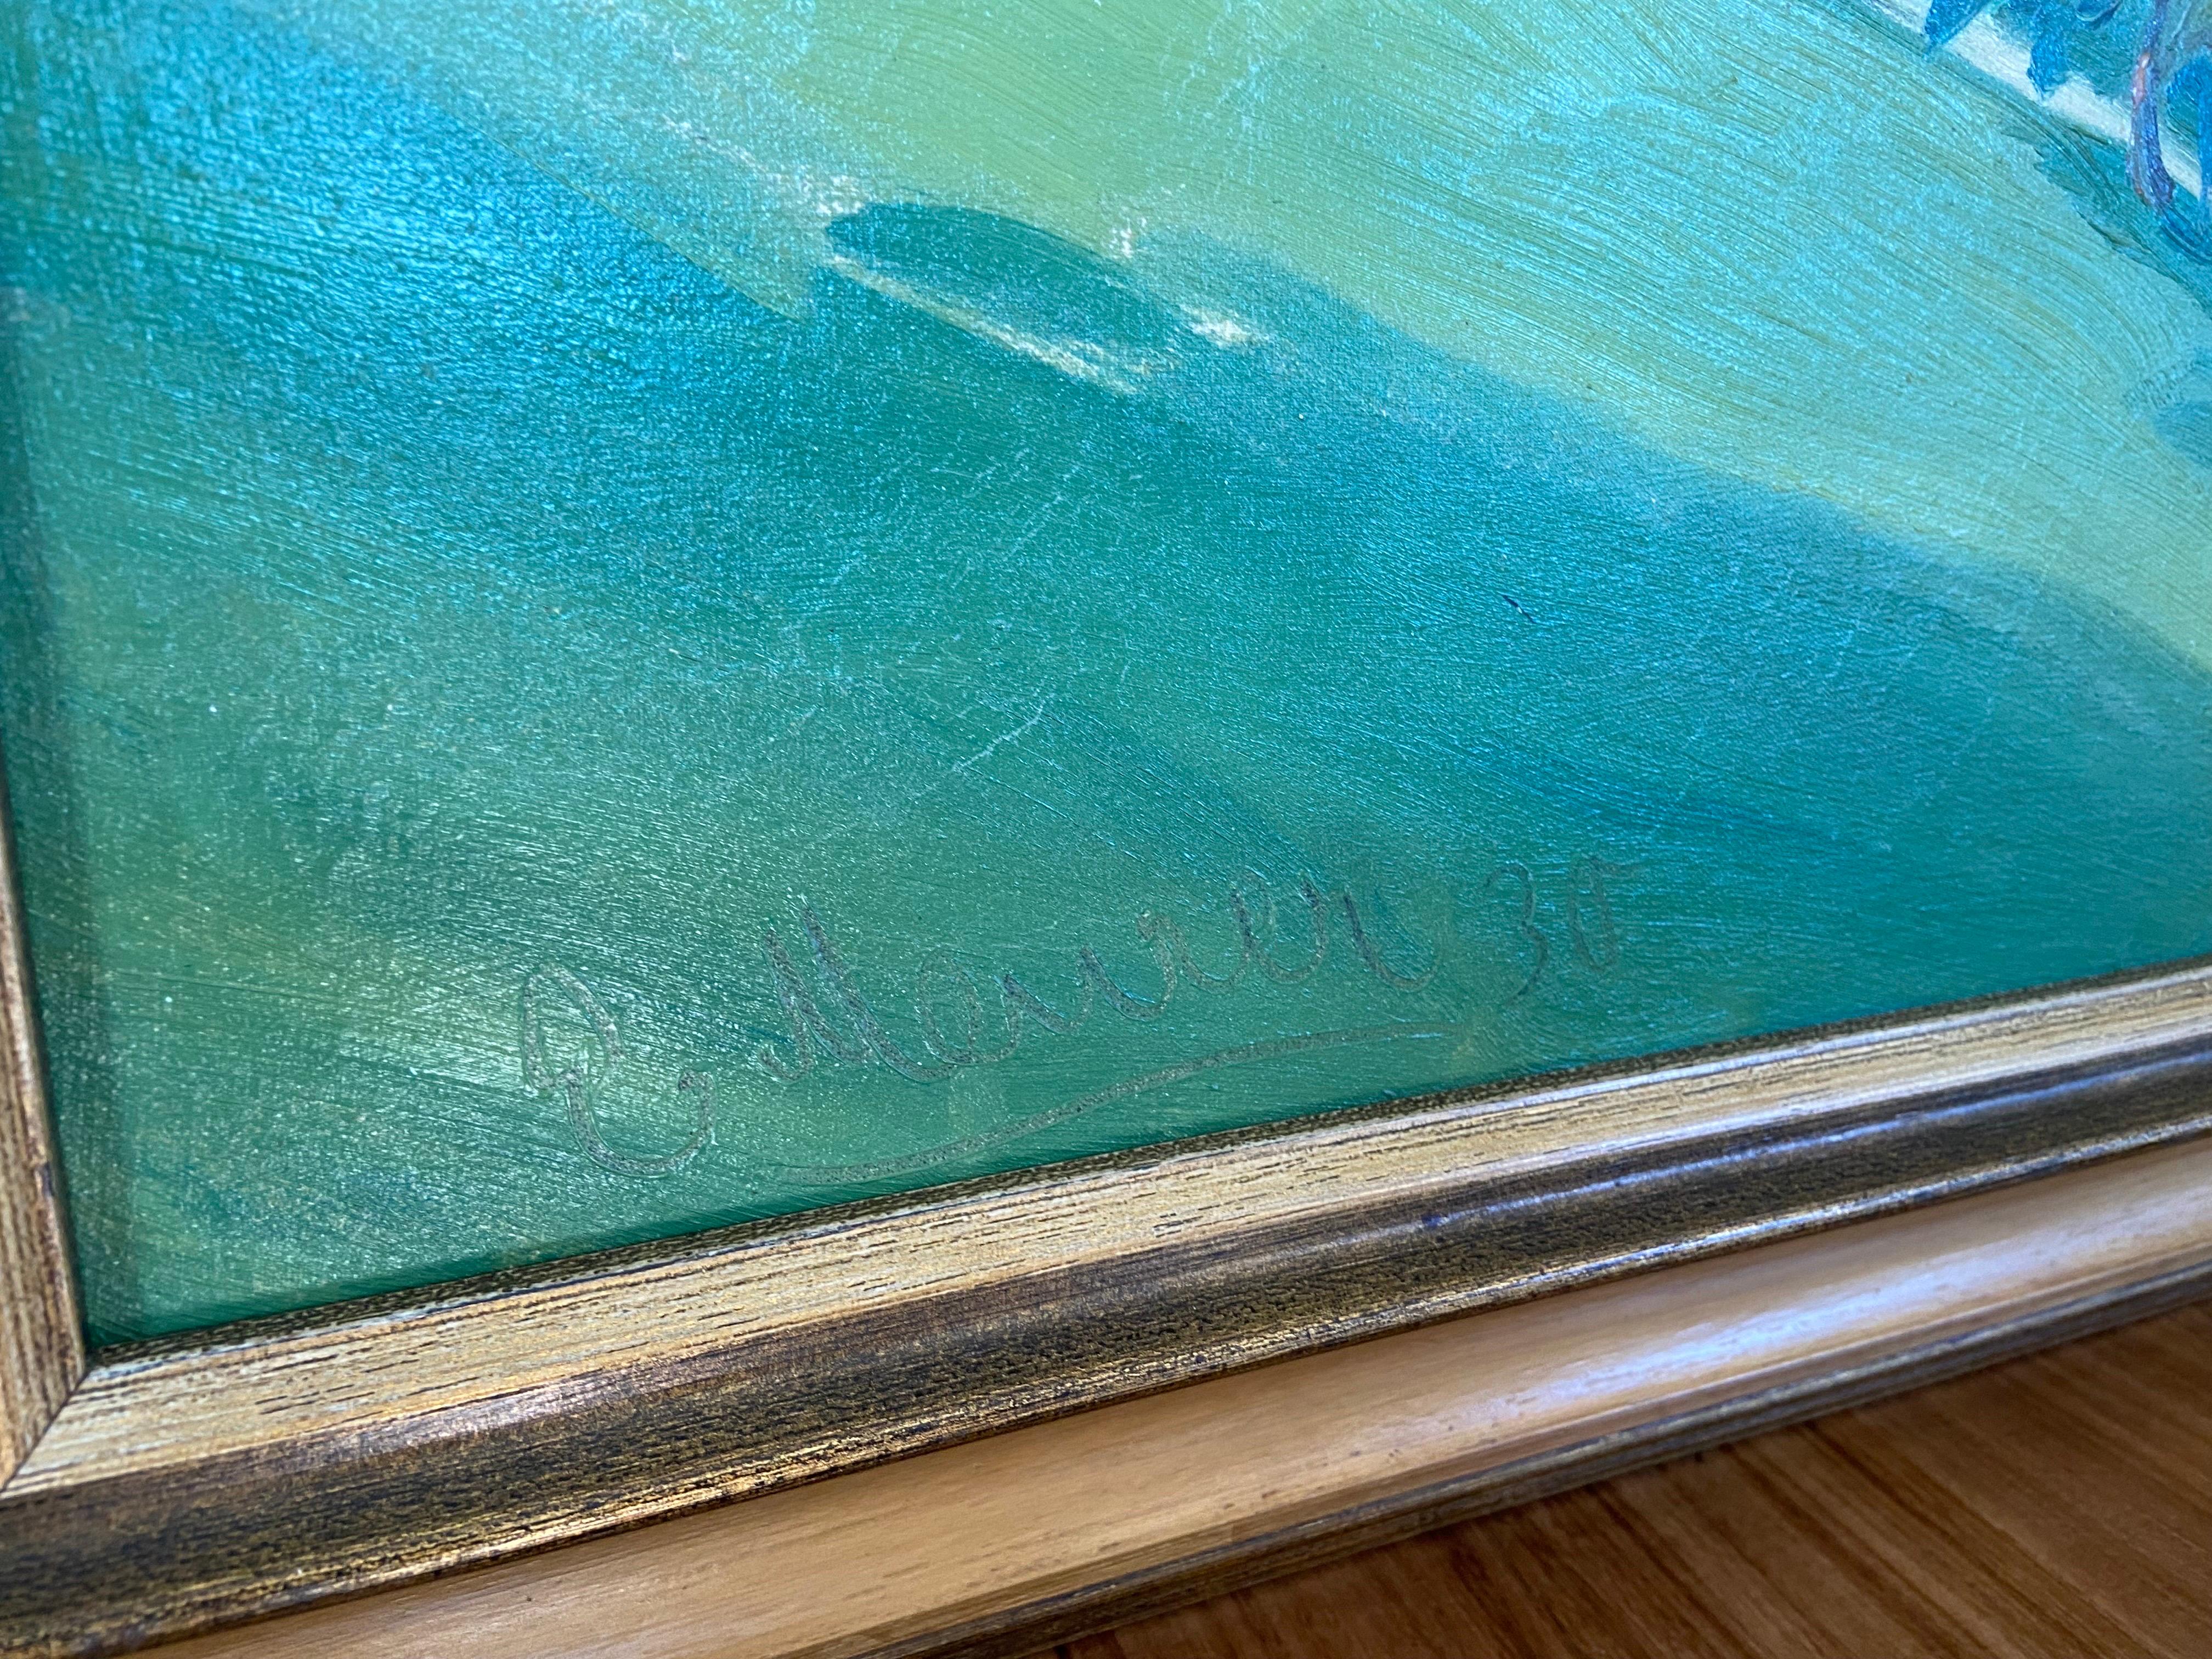 Large landscape oill on canvas in vivid green colours signed by the german artist Ernst Meurer. The painting is still in its original frame and the size is 93/66 cm. Very good condition even if it is almost 100 years old. Very bright and peaceful